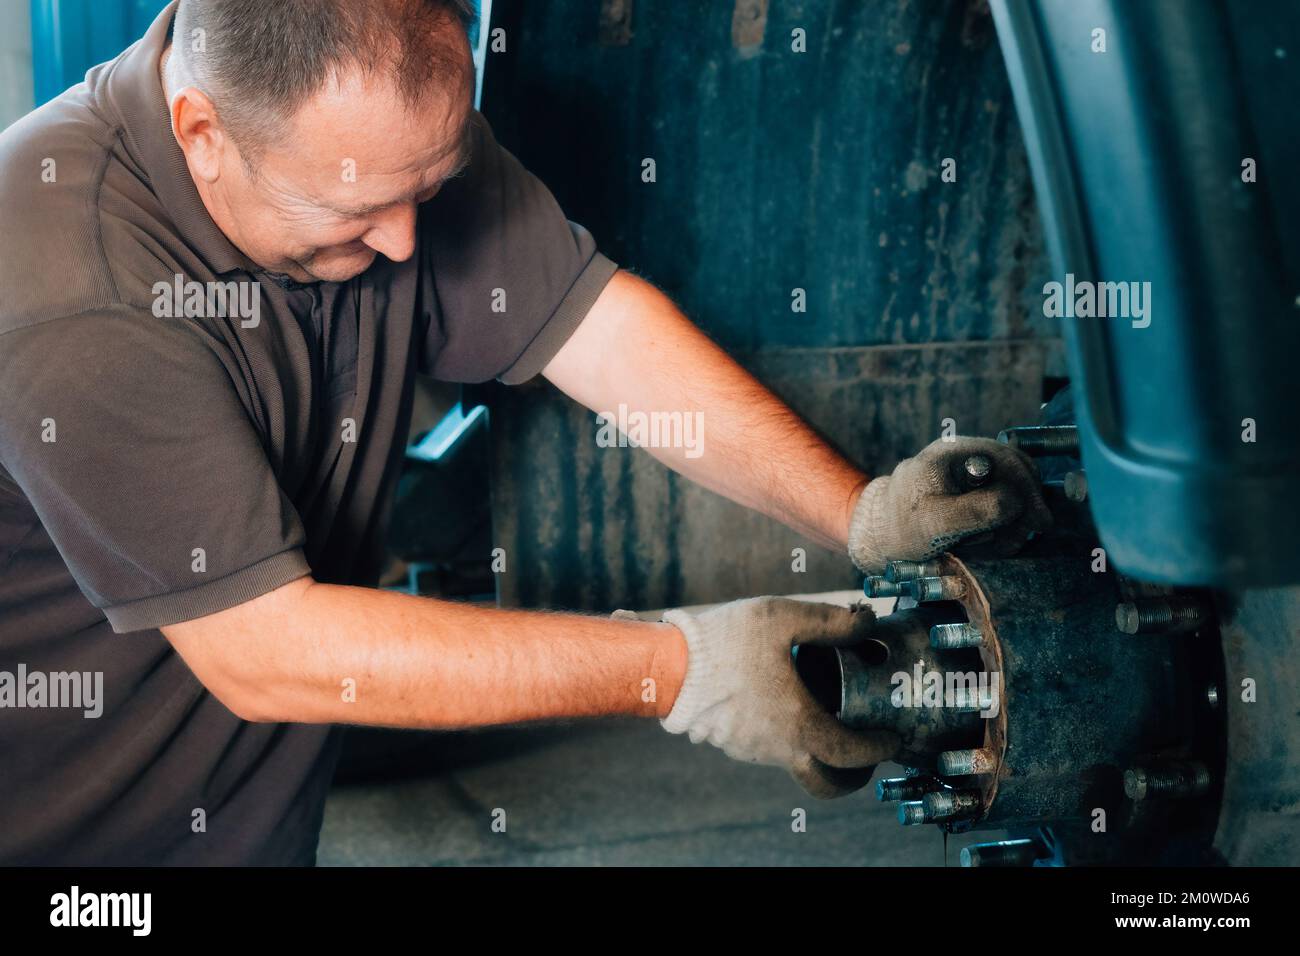 Auto mechanic repairs hub of truck in car repair shop. White Caucasian man in gloves disassembles car. Service for repair of large trucks and tractors. Background. Real workflow.. Stock Photo